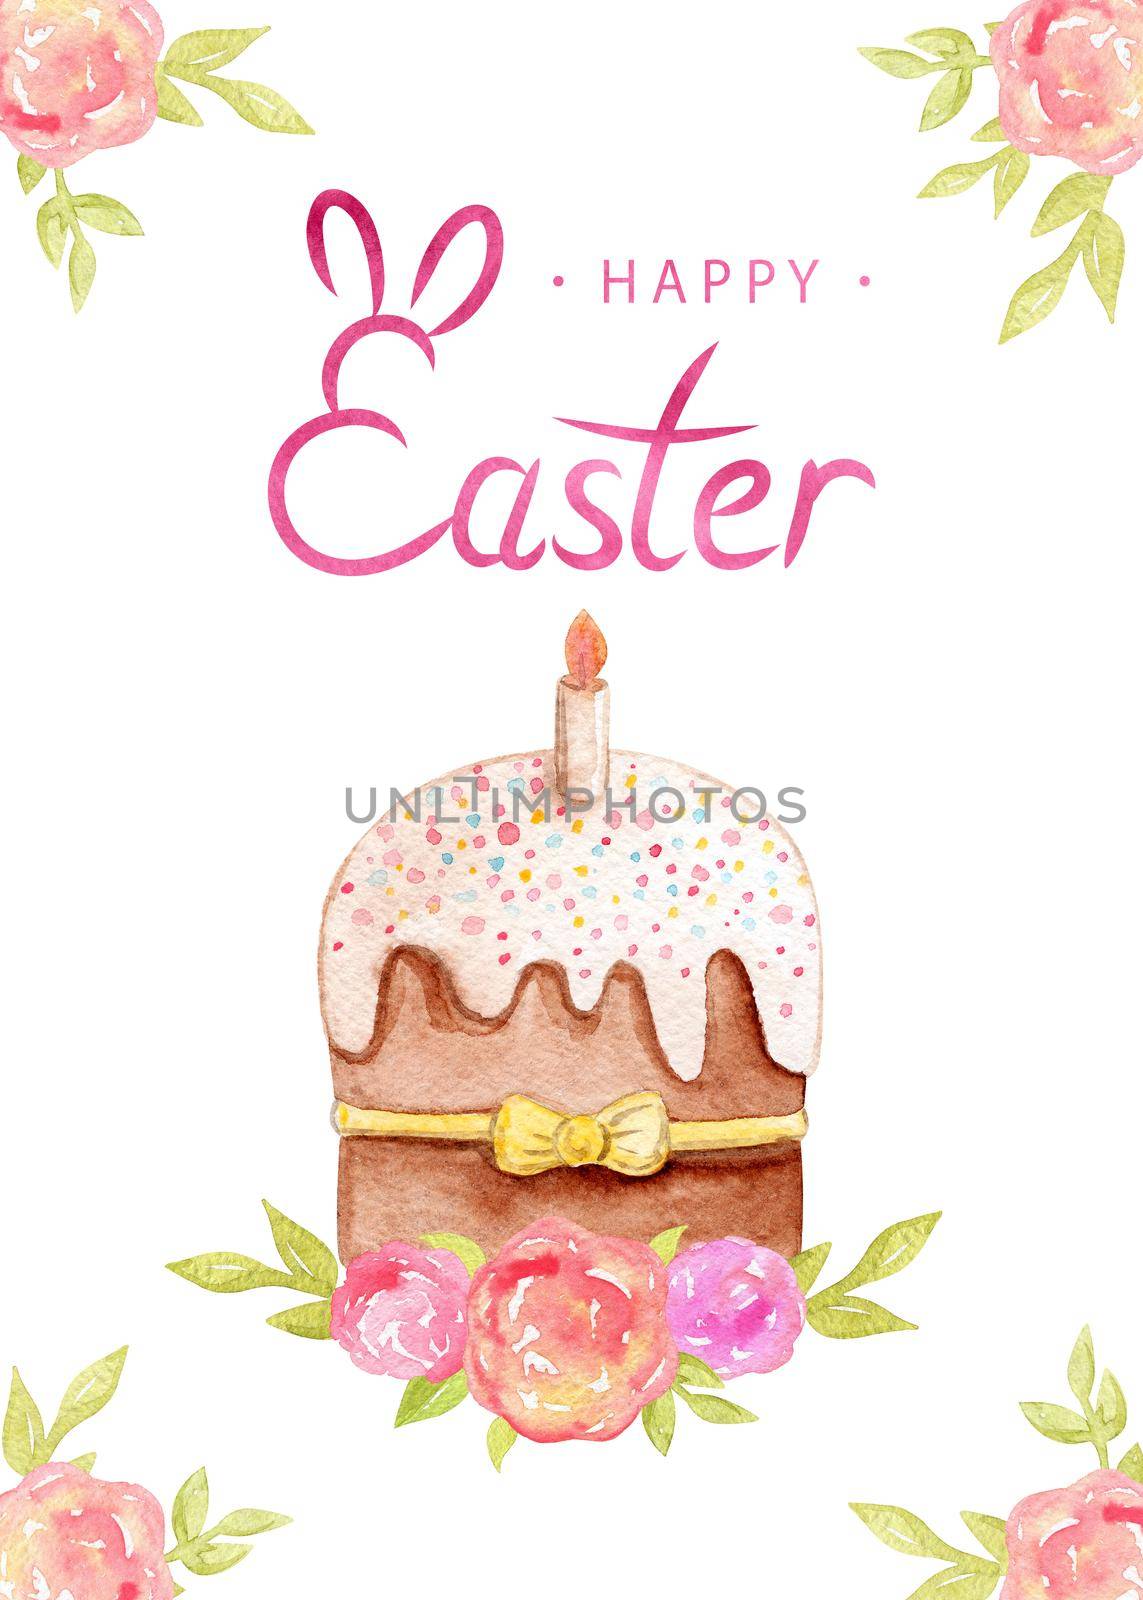 Watercolor happy easter card with cake and Spring flowers by dreamloud